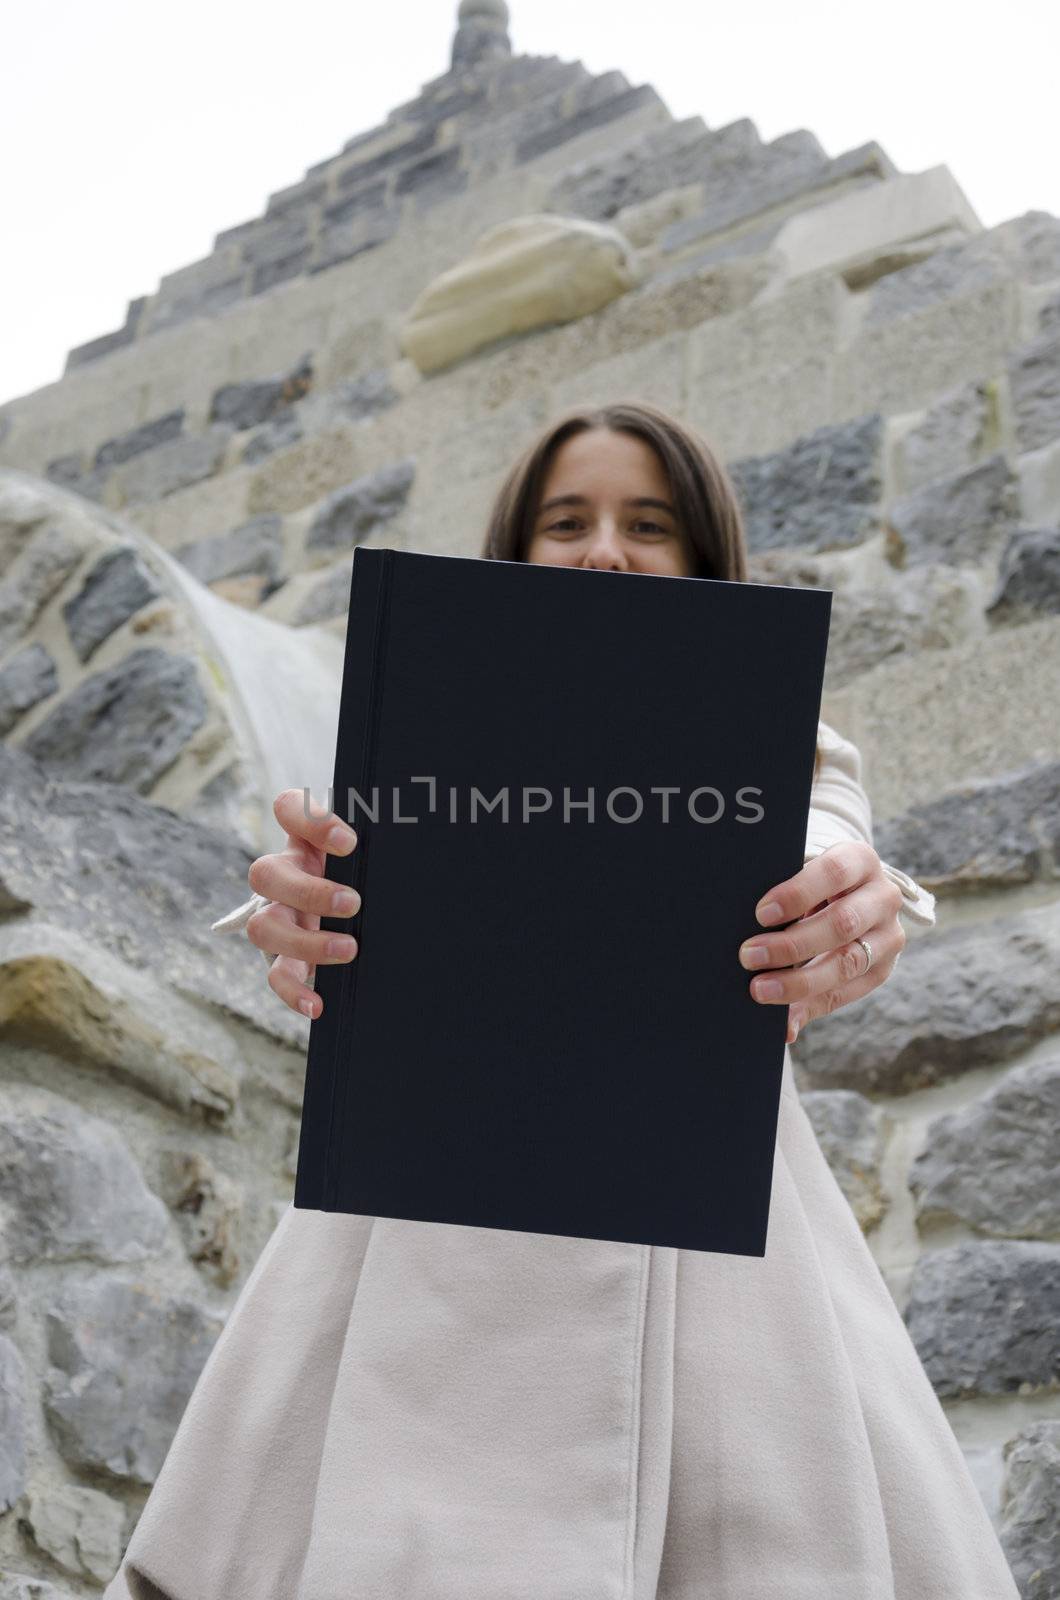 Girl holding degree dissertation. Empty space on book cover ready for text.